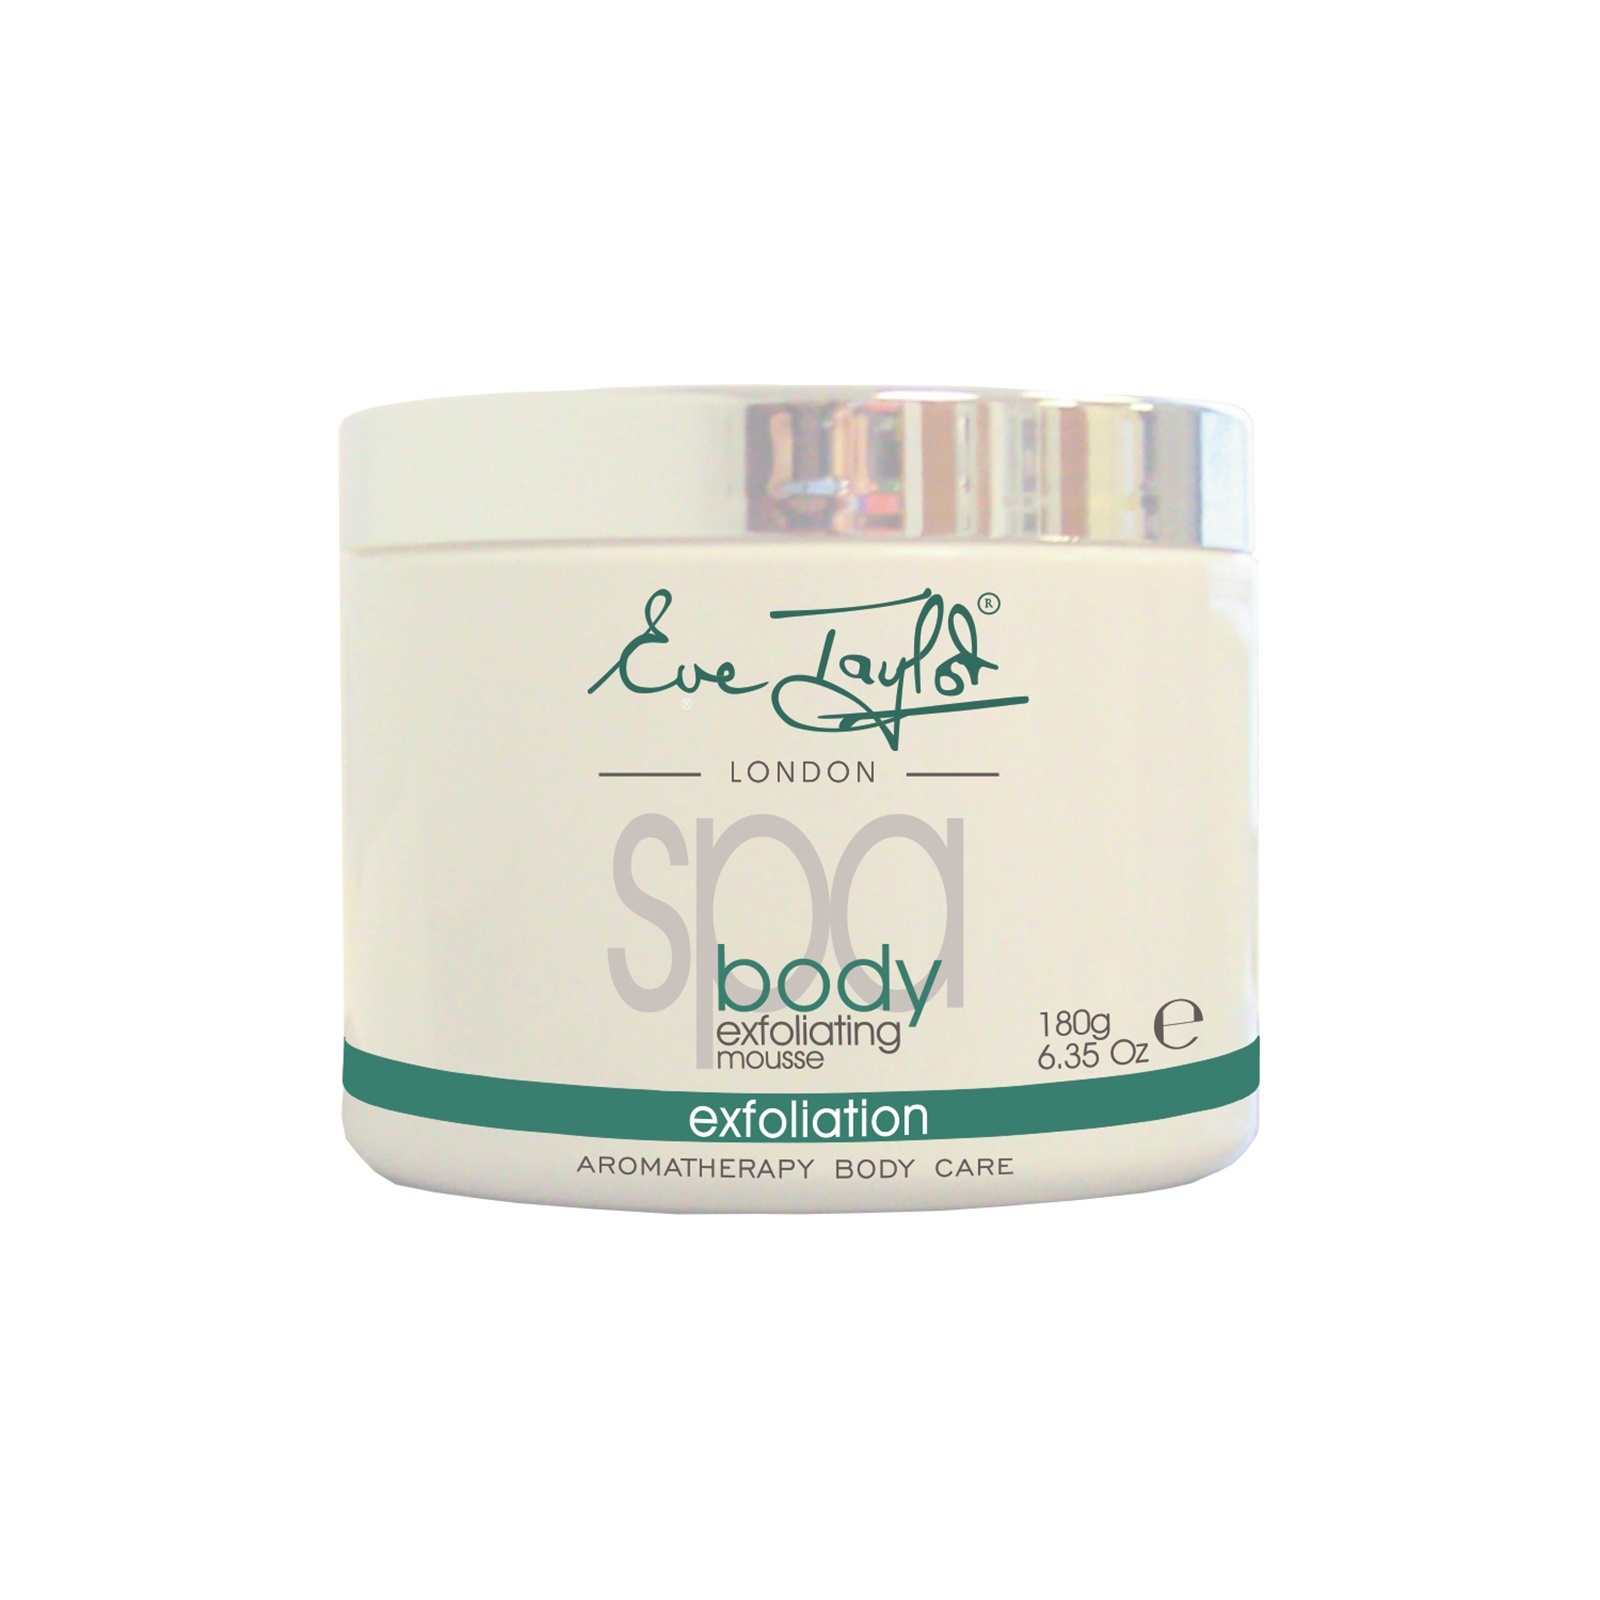 Eve Taylor Spa Body Exfoliating Mousse